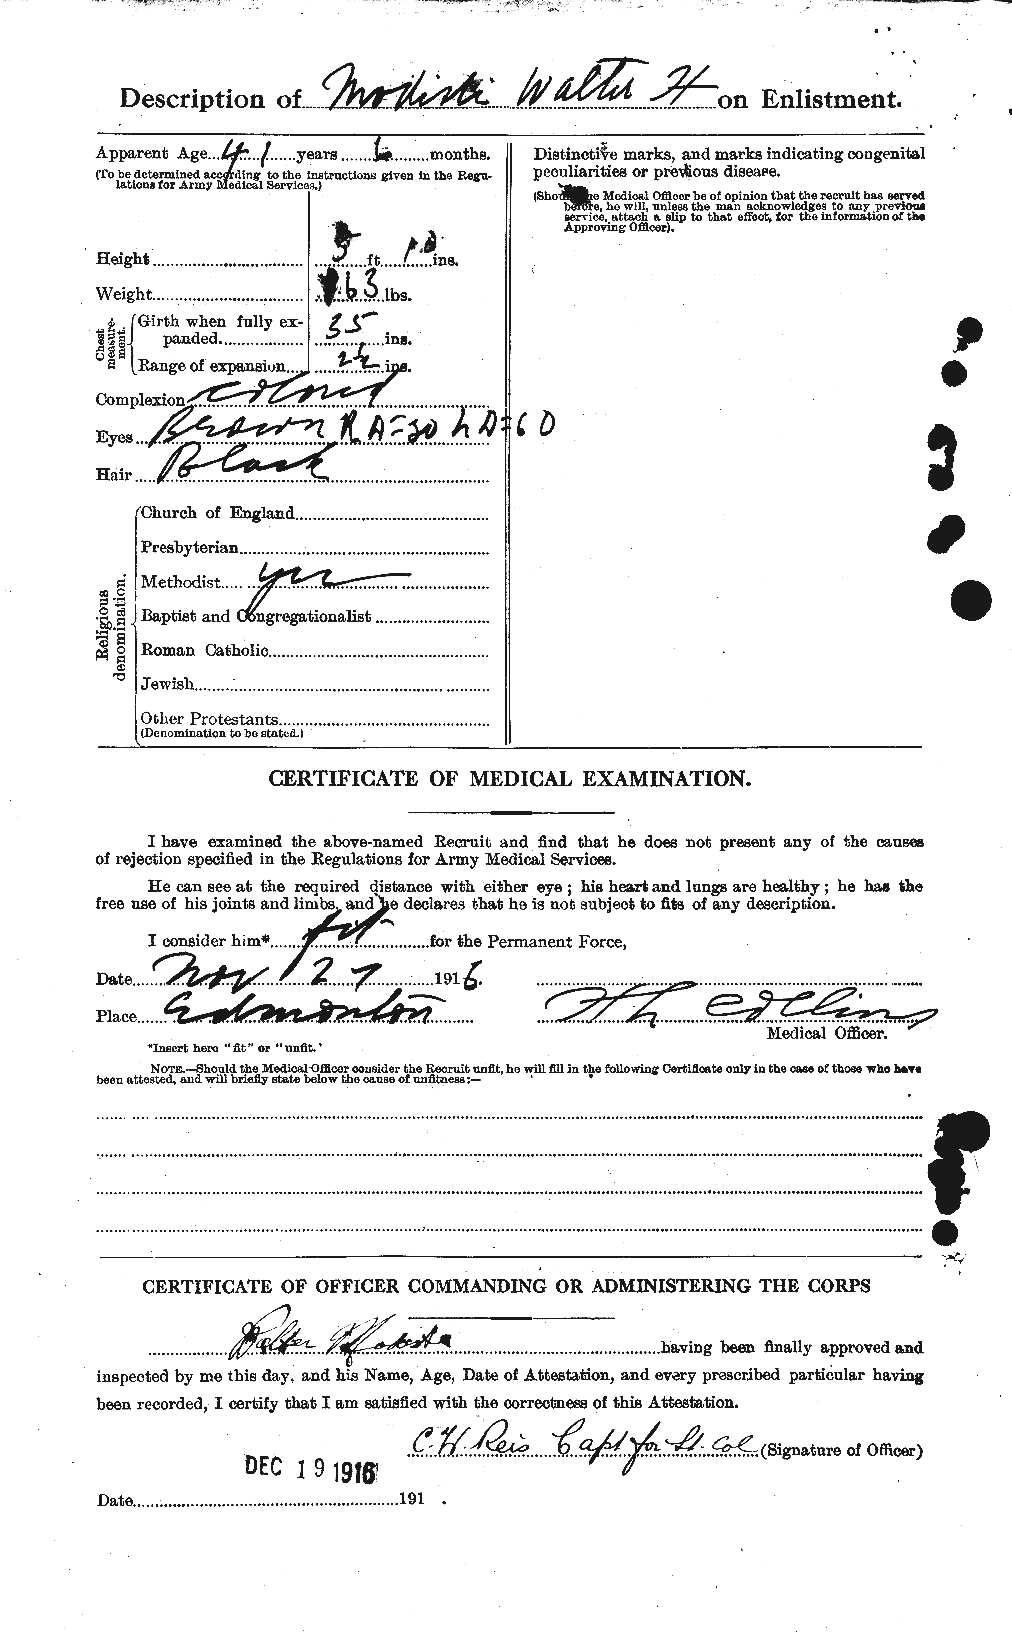 Personnel Records of the First World War - CEF 498944b